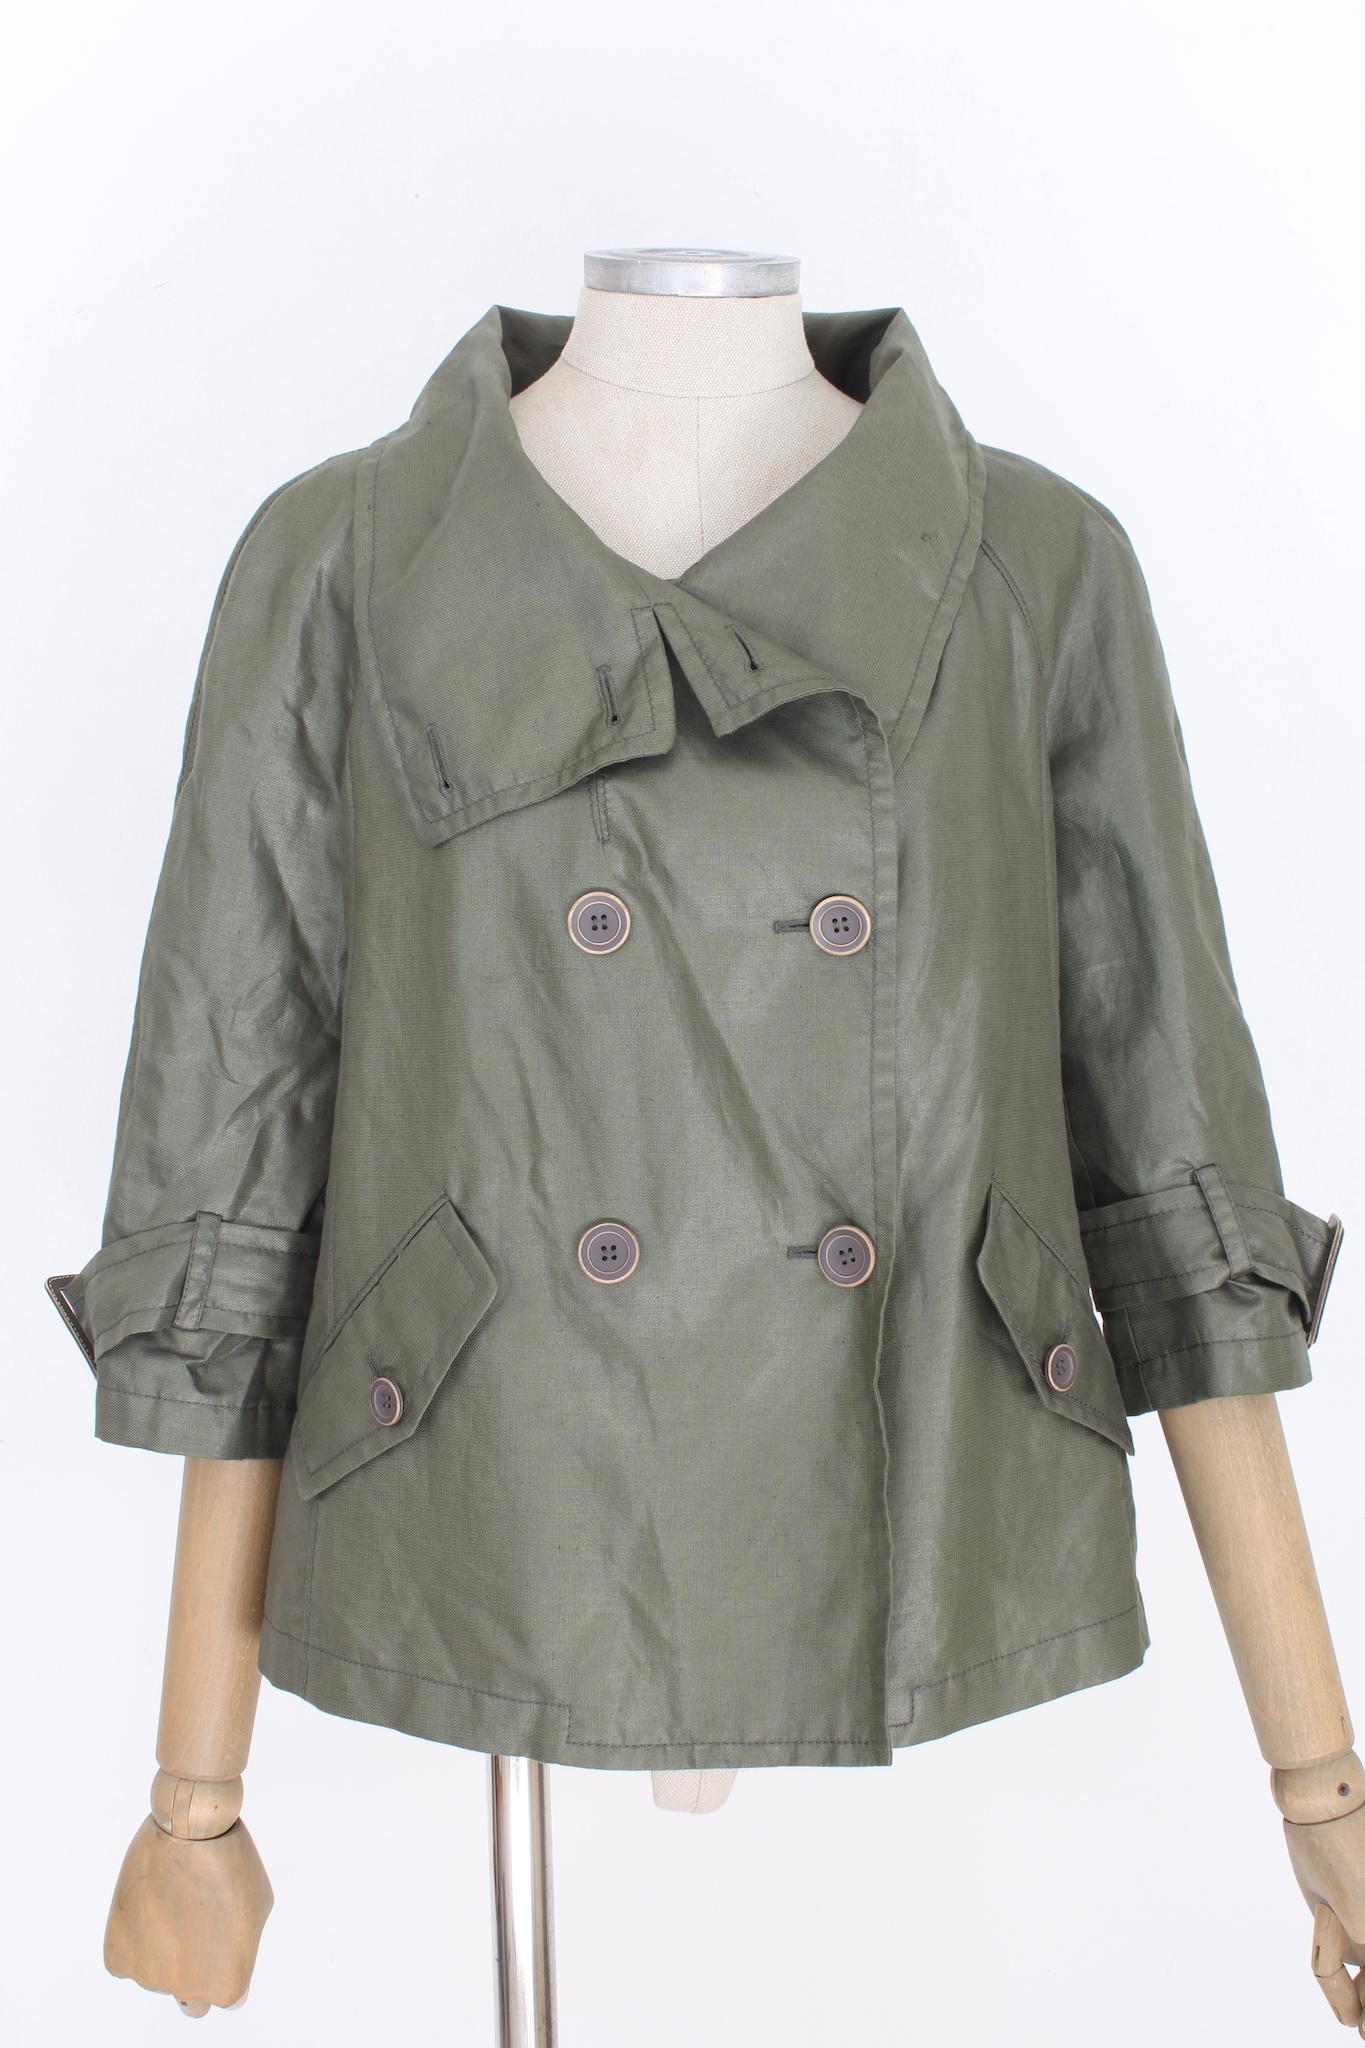 Siviglia green double-breasted jacket 2000s. Short jacket, waxed cotton fabric, with high collar and 3/4 sleeves.

Size: 44 It 10 Us 12 Uk

Shoulder: 44 cm 
Bust/Chest: 52 cm
Sleeve: 43 cm
Length: 65 cm